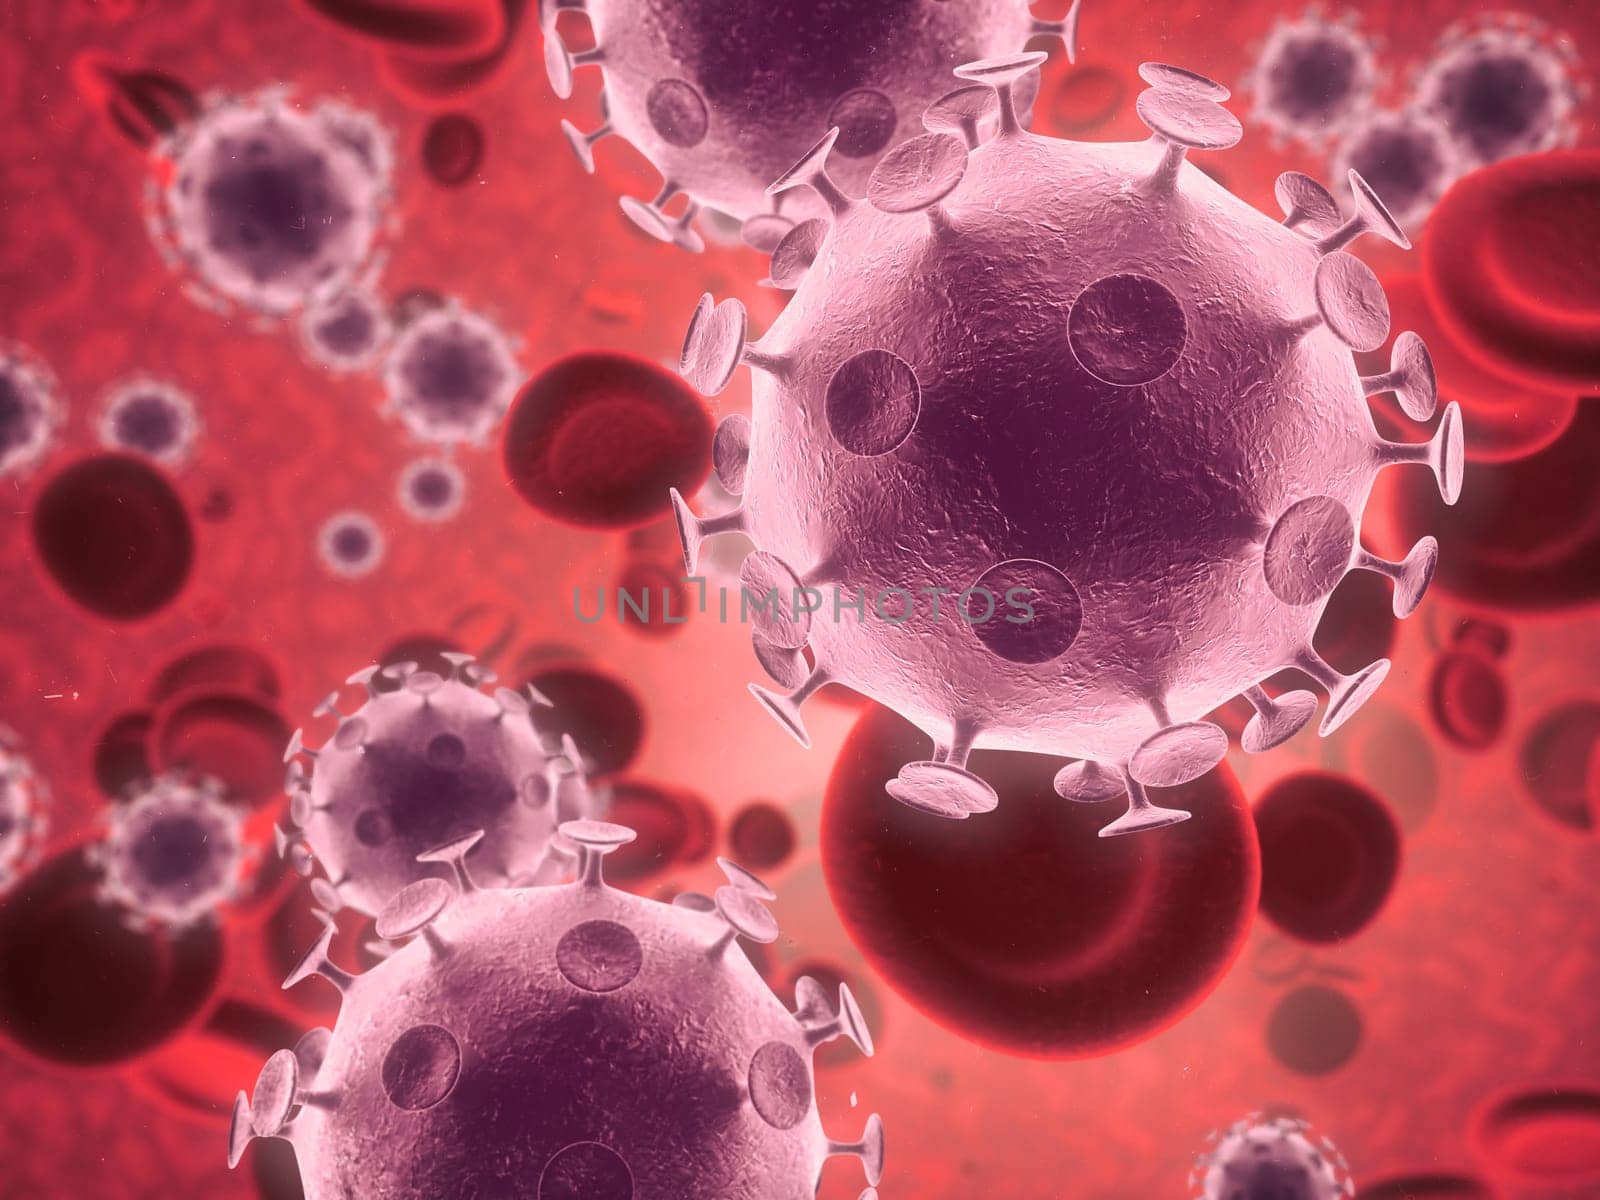 Virus, germ and molecule with abstract, render or illustration of blood cells. Immune system, micro biology and sick for science, microscope and medical research for sepsis or senolytics treatment by YuriArcurs